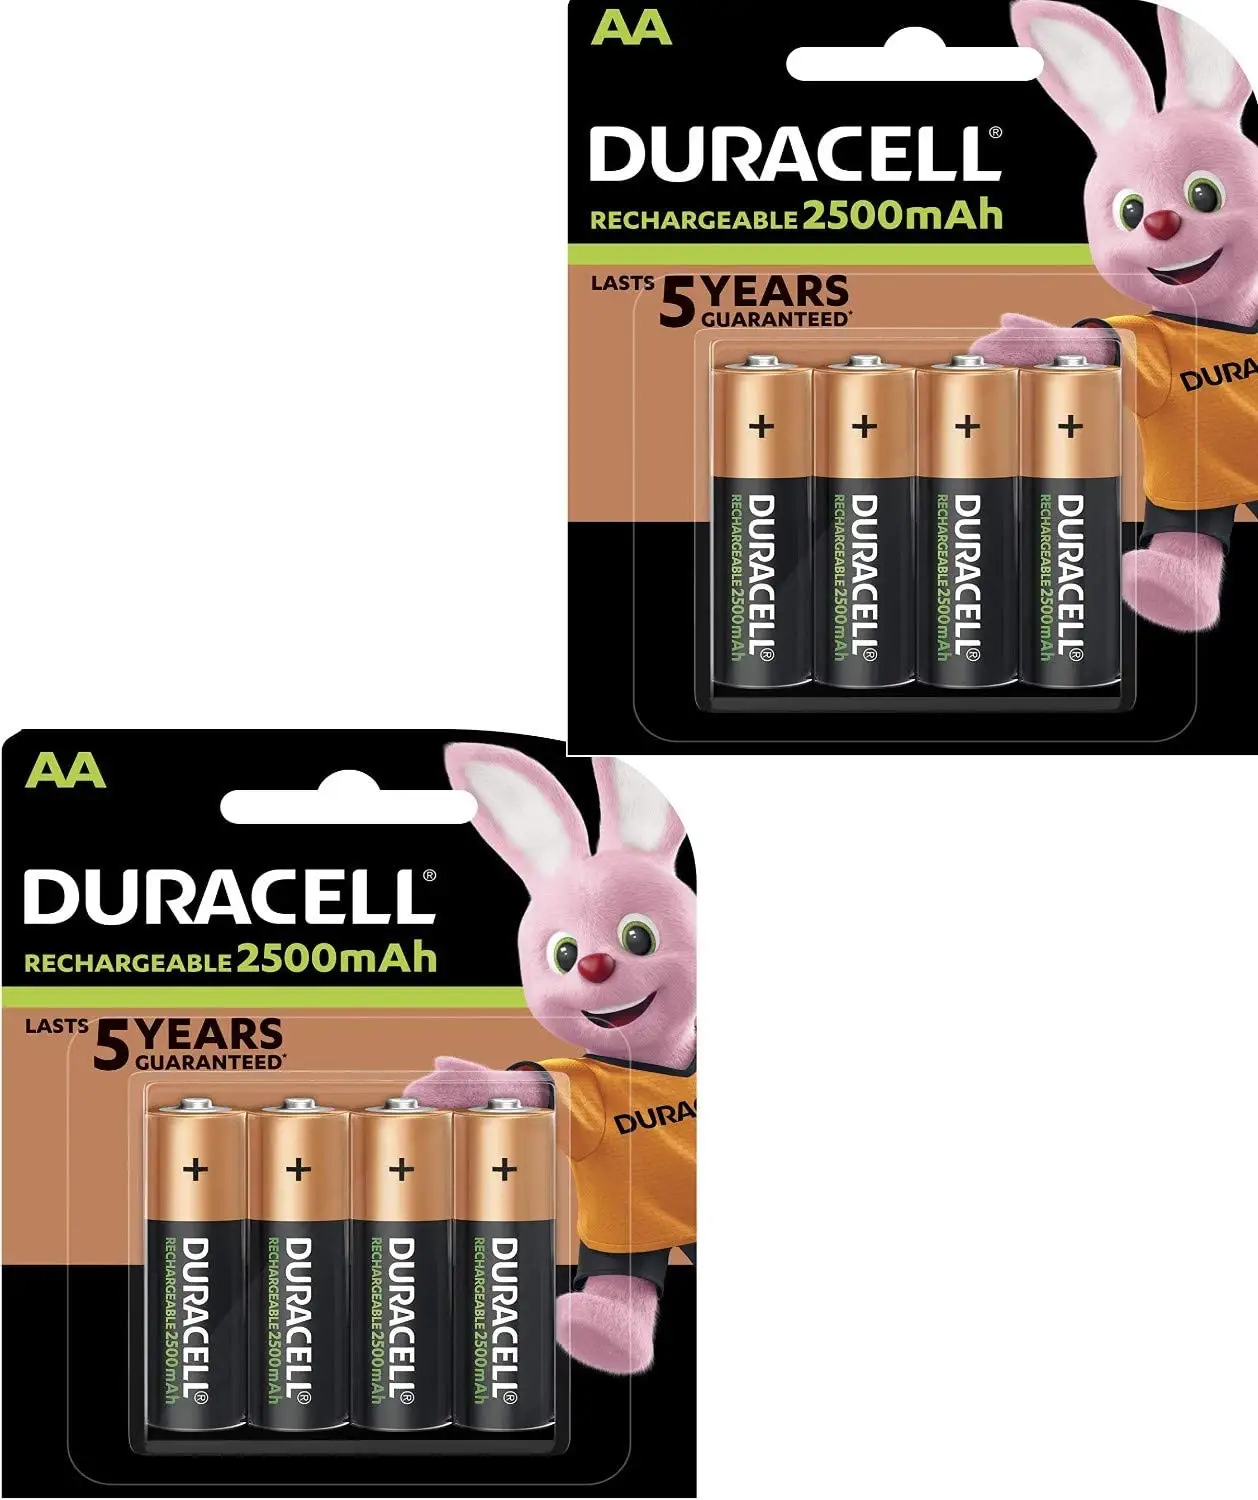 Duracell Rechargeable AA 2500mAh batteries